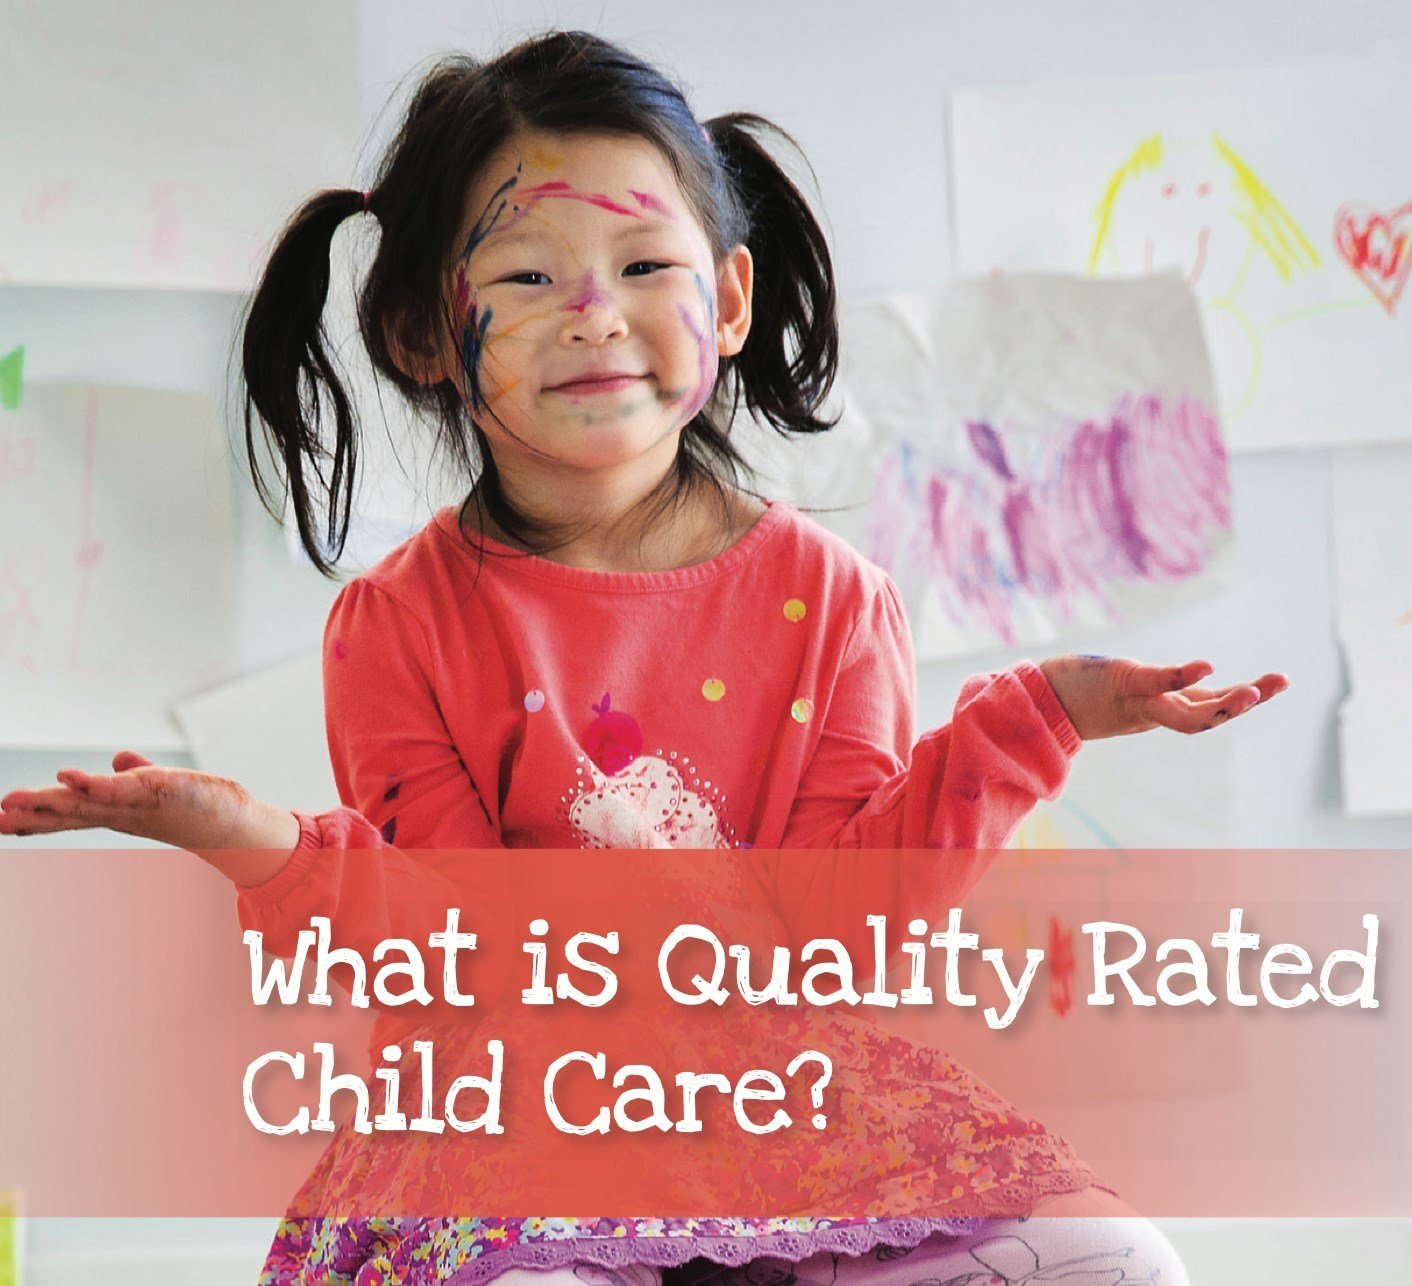 Georgia&rsquo;s @QualityRated tool helps families find child care programs in their area that have been evaluated by credentialed early childhood experts and identified as high-quality.

We can help you find summer camps, child care, and afterschool 